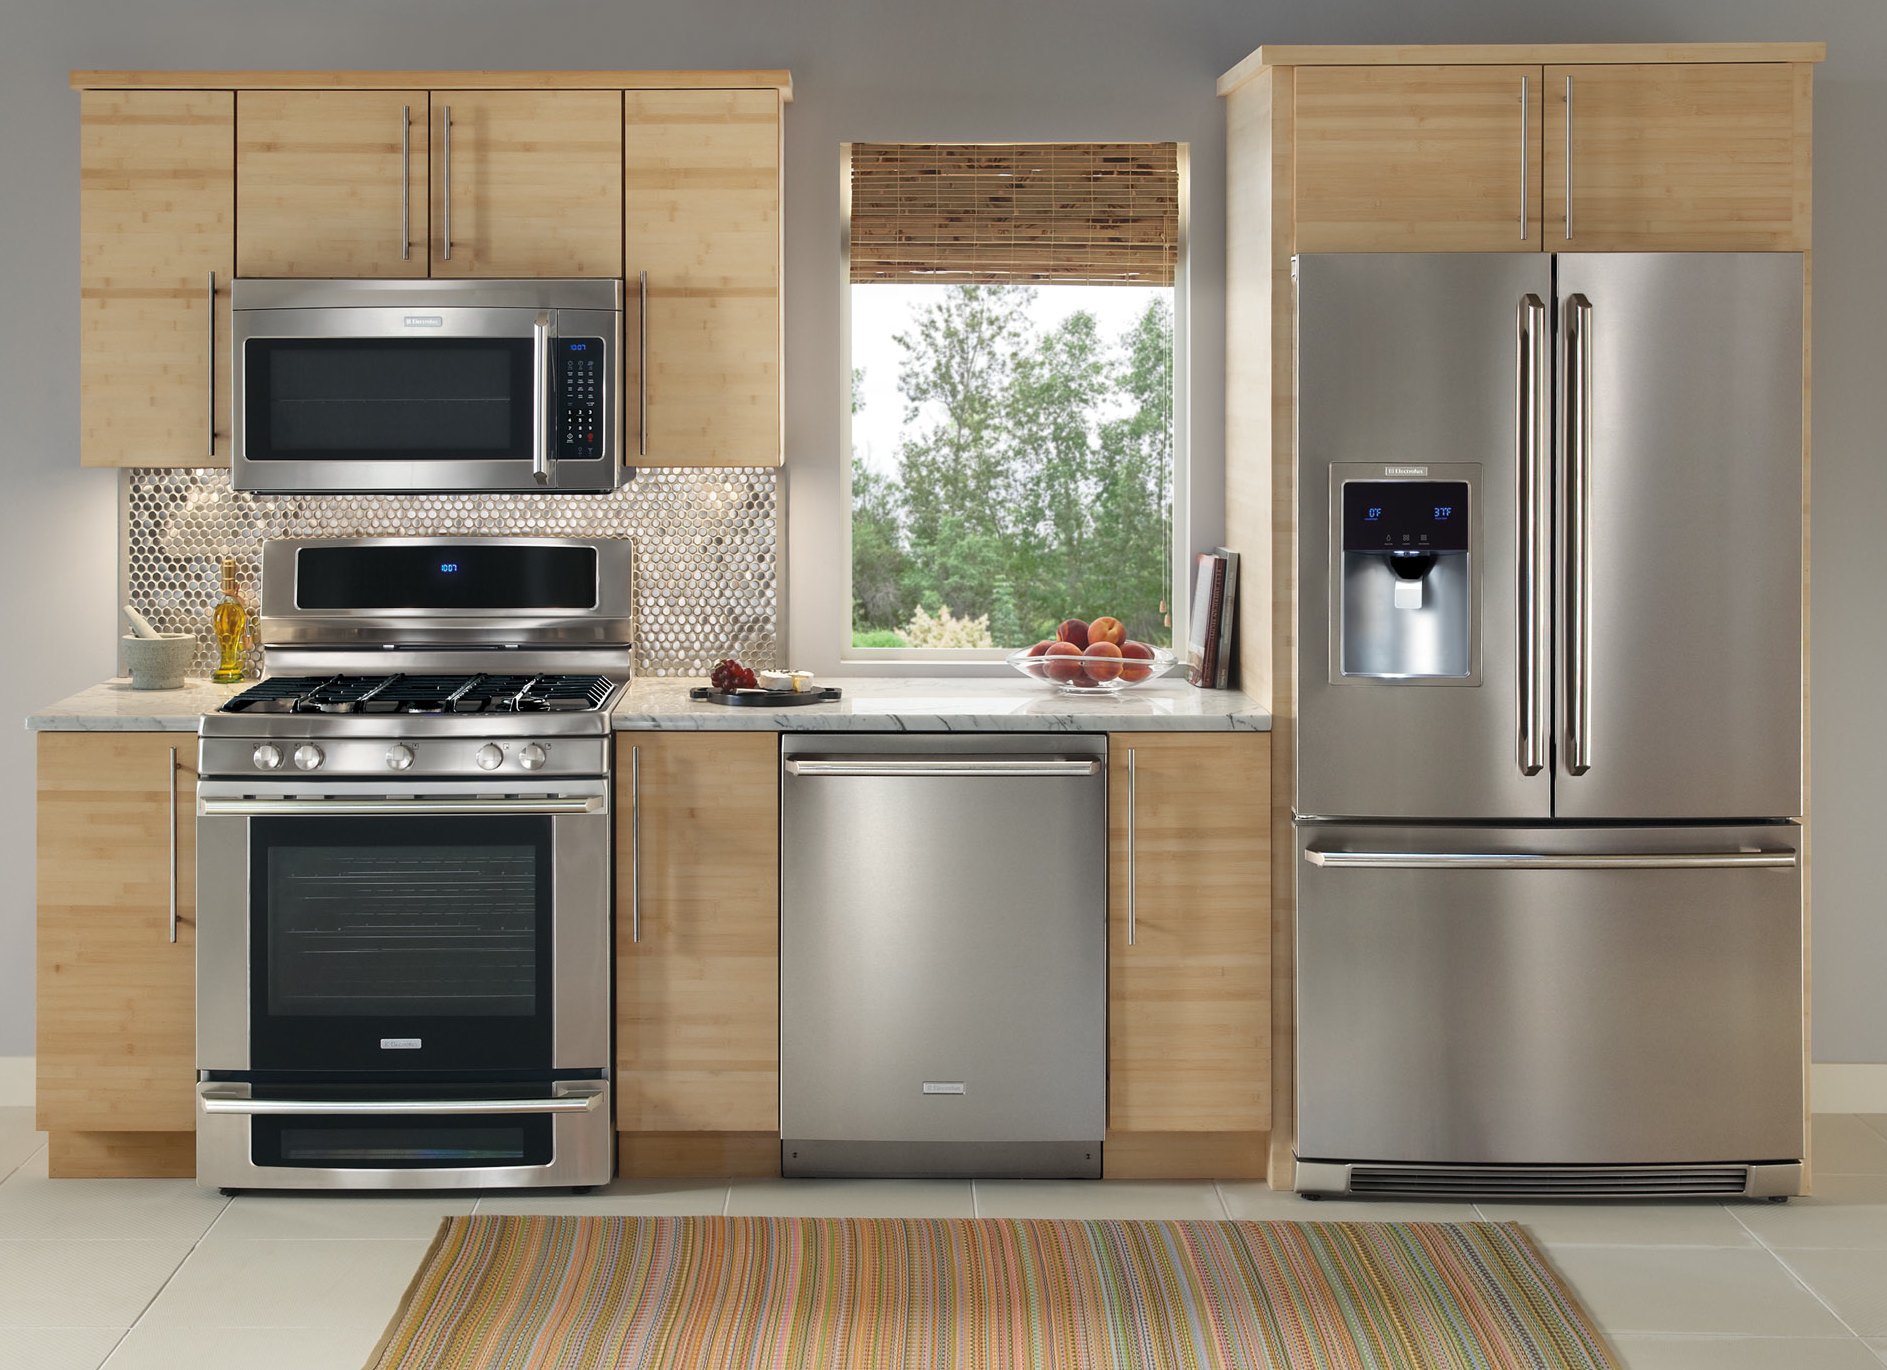 Stainless Steel Appliance